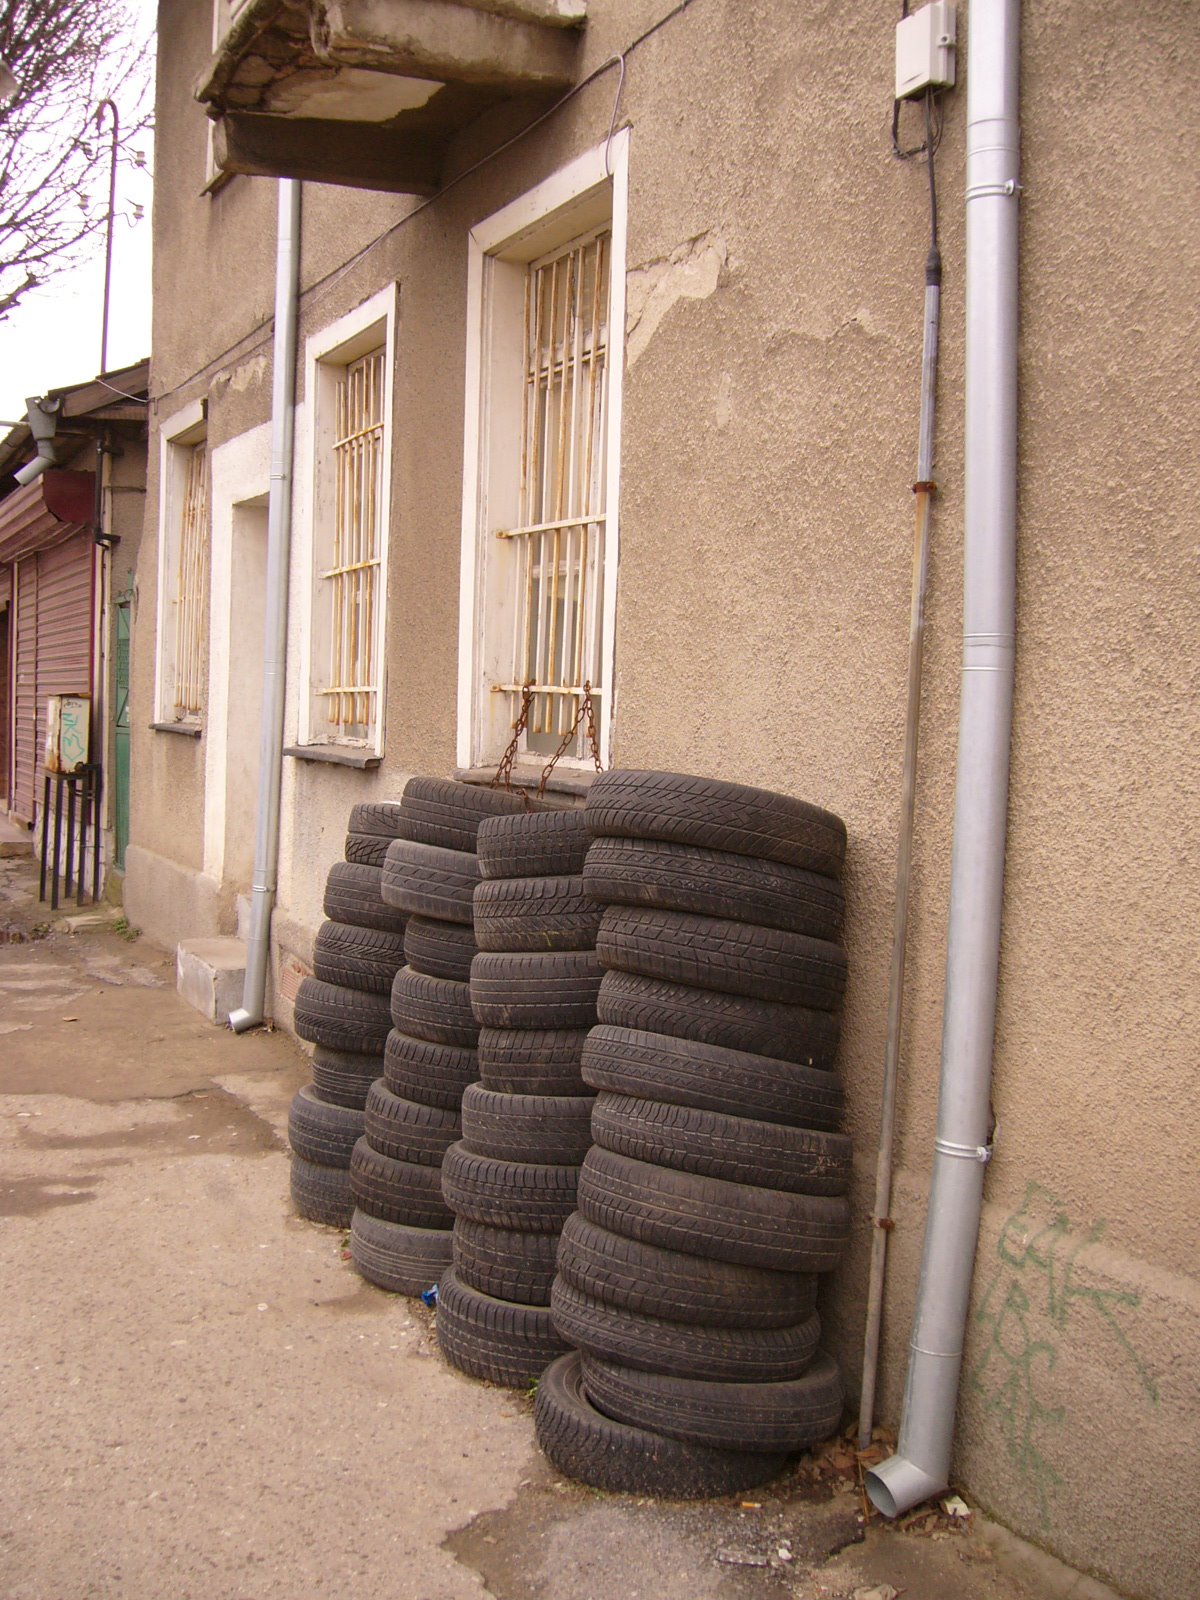 [yambol+daily+picture+6+2+09+Pile+of+Tyres.jpg]